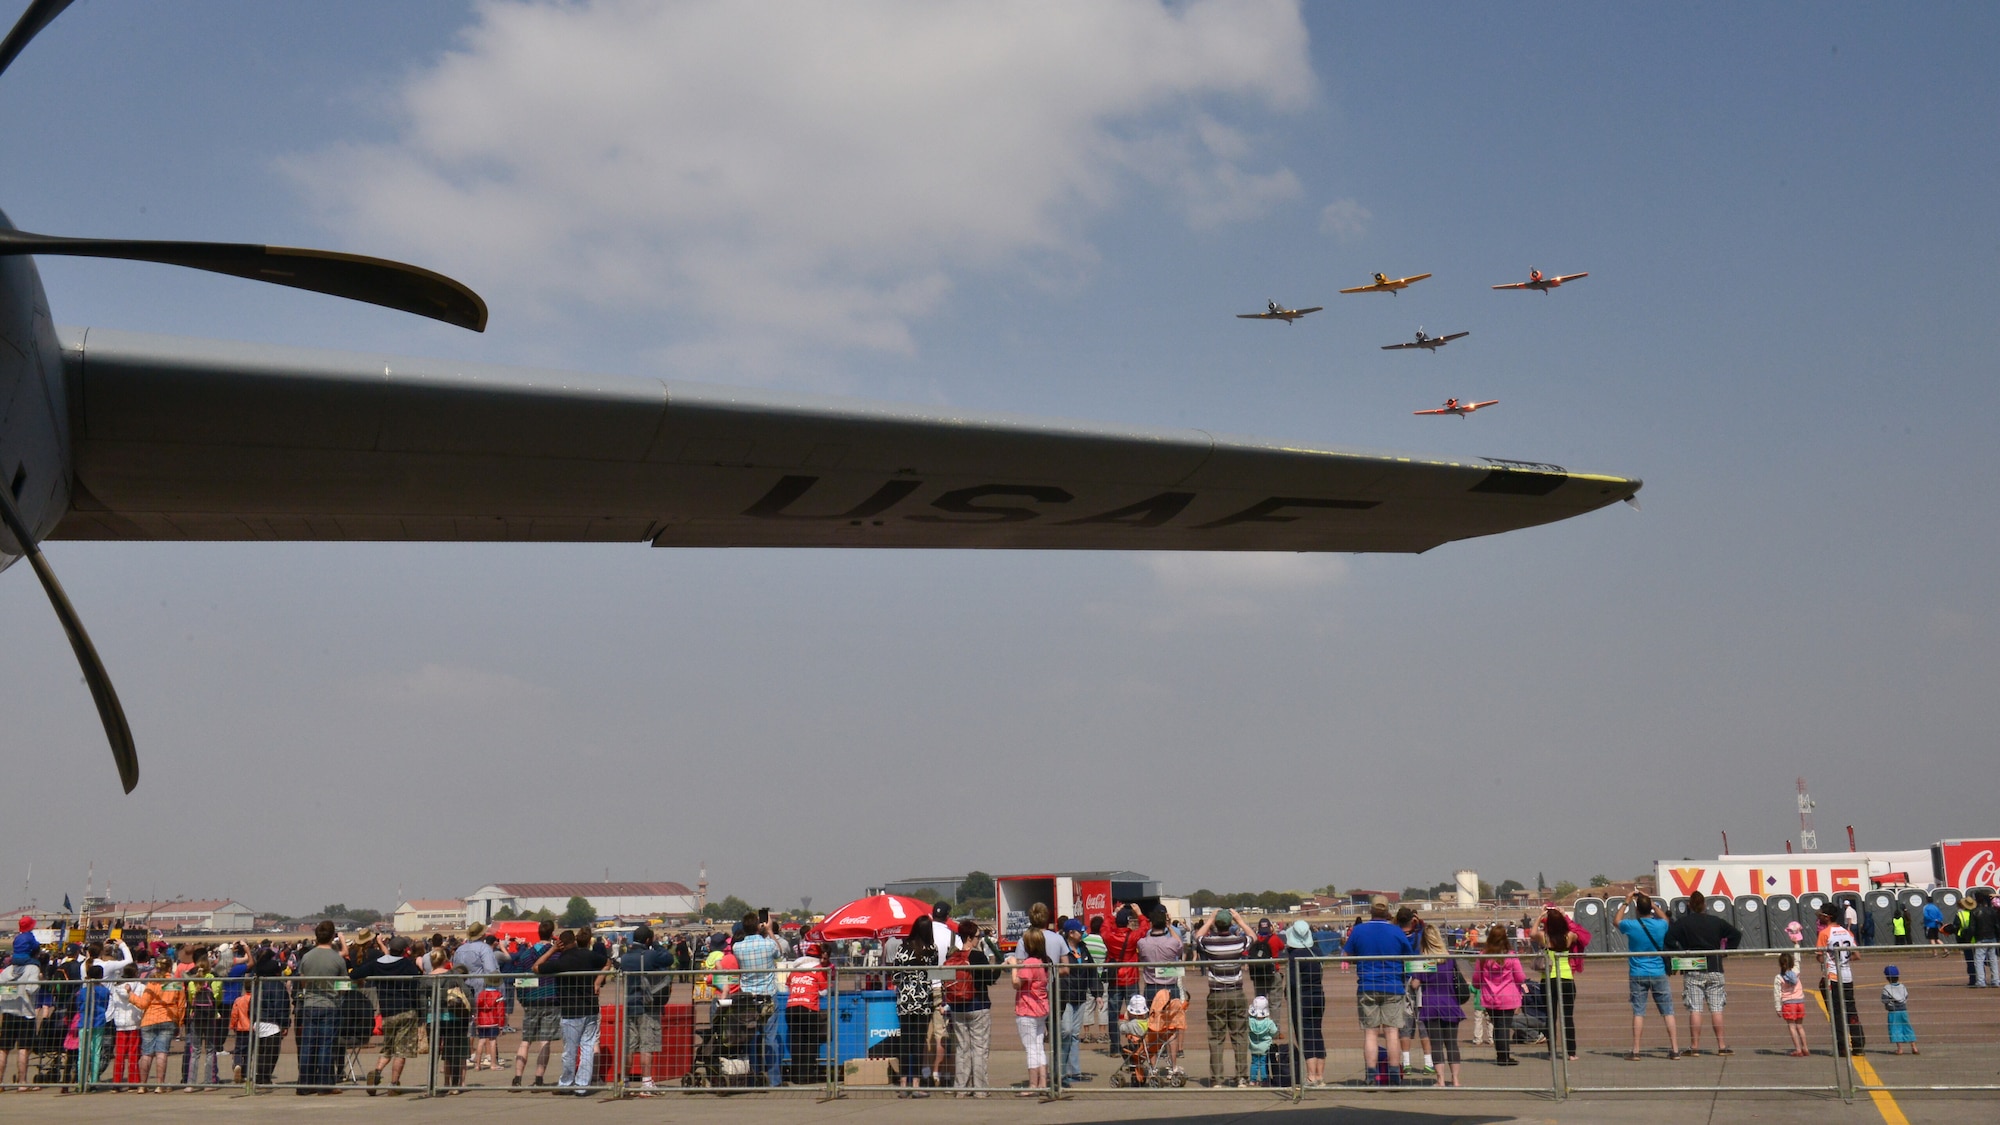 An aerial demonstration team flies over a crowd lined up to look inside a C-130J Super Hercules at the Africa Aerospace & Defence Expo at Waterkloof Air Force Base, South Africa, Sept. 20, 2014.  The C-130 was part of a total-force team of Guard, Reserve and active-duty Soldiers and Airmen at the expo. (U.S. Air Force photo/Staff Sgt. Travis Edwards)